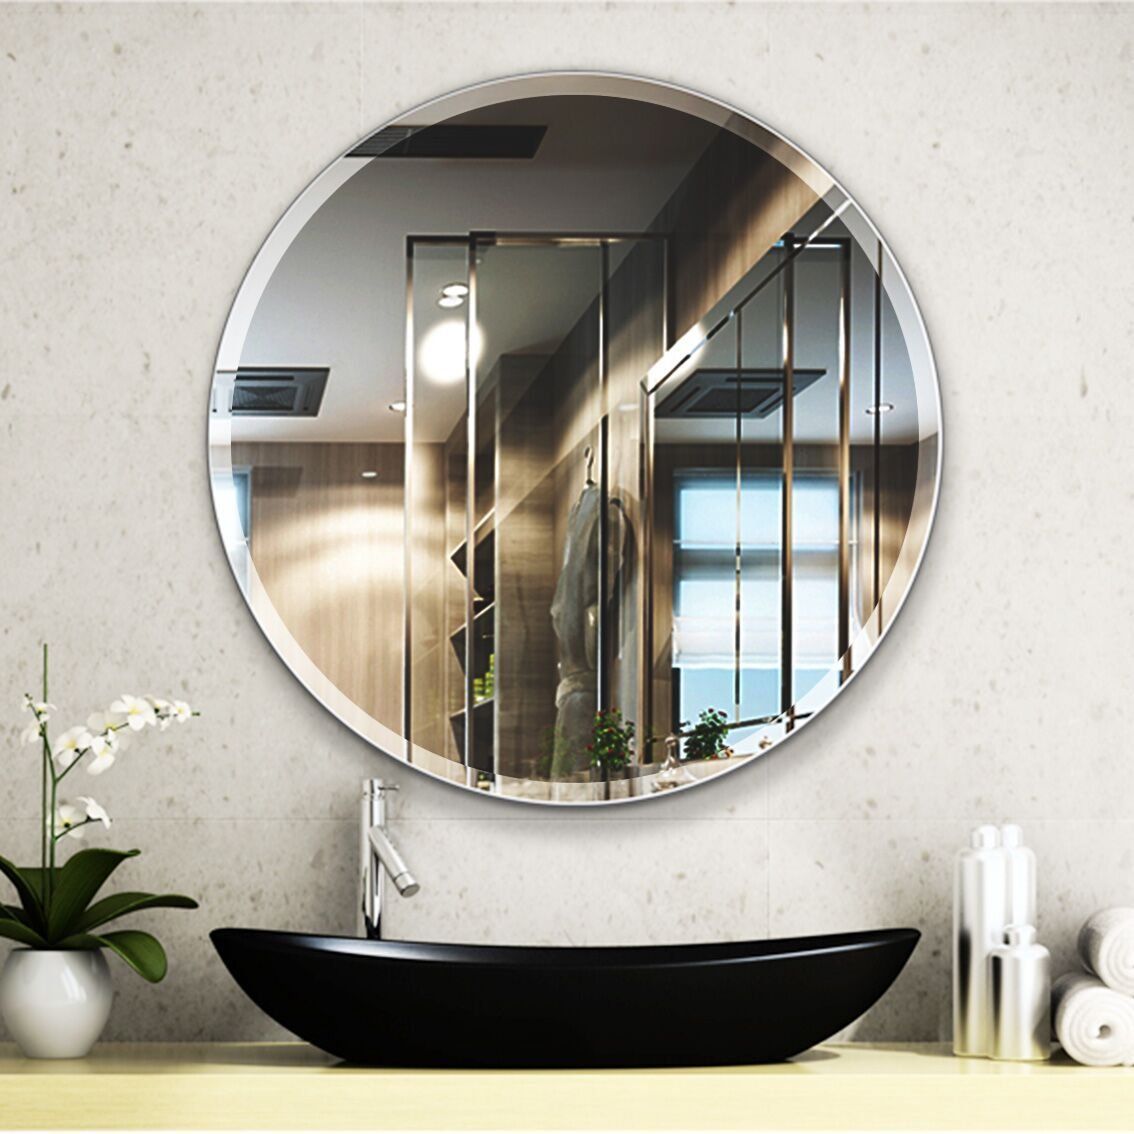 28 Inch Round Frameless Mirror Large Beveled Wall Mirror | Mirror Wall Inside Crown Frameless Beveled Wall Mirrors (View 9 of 15)